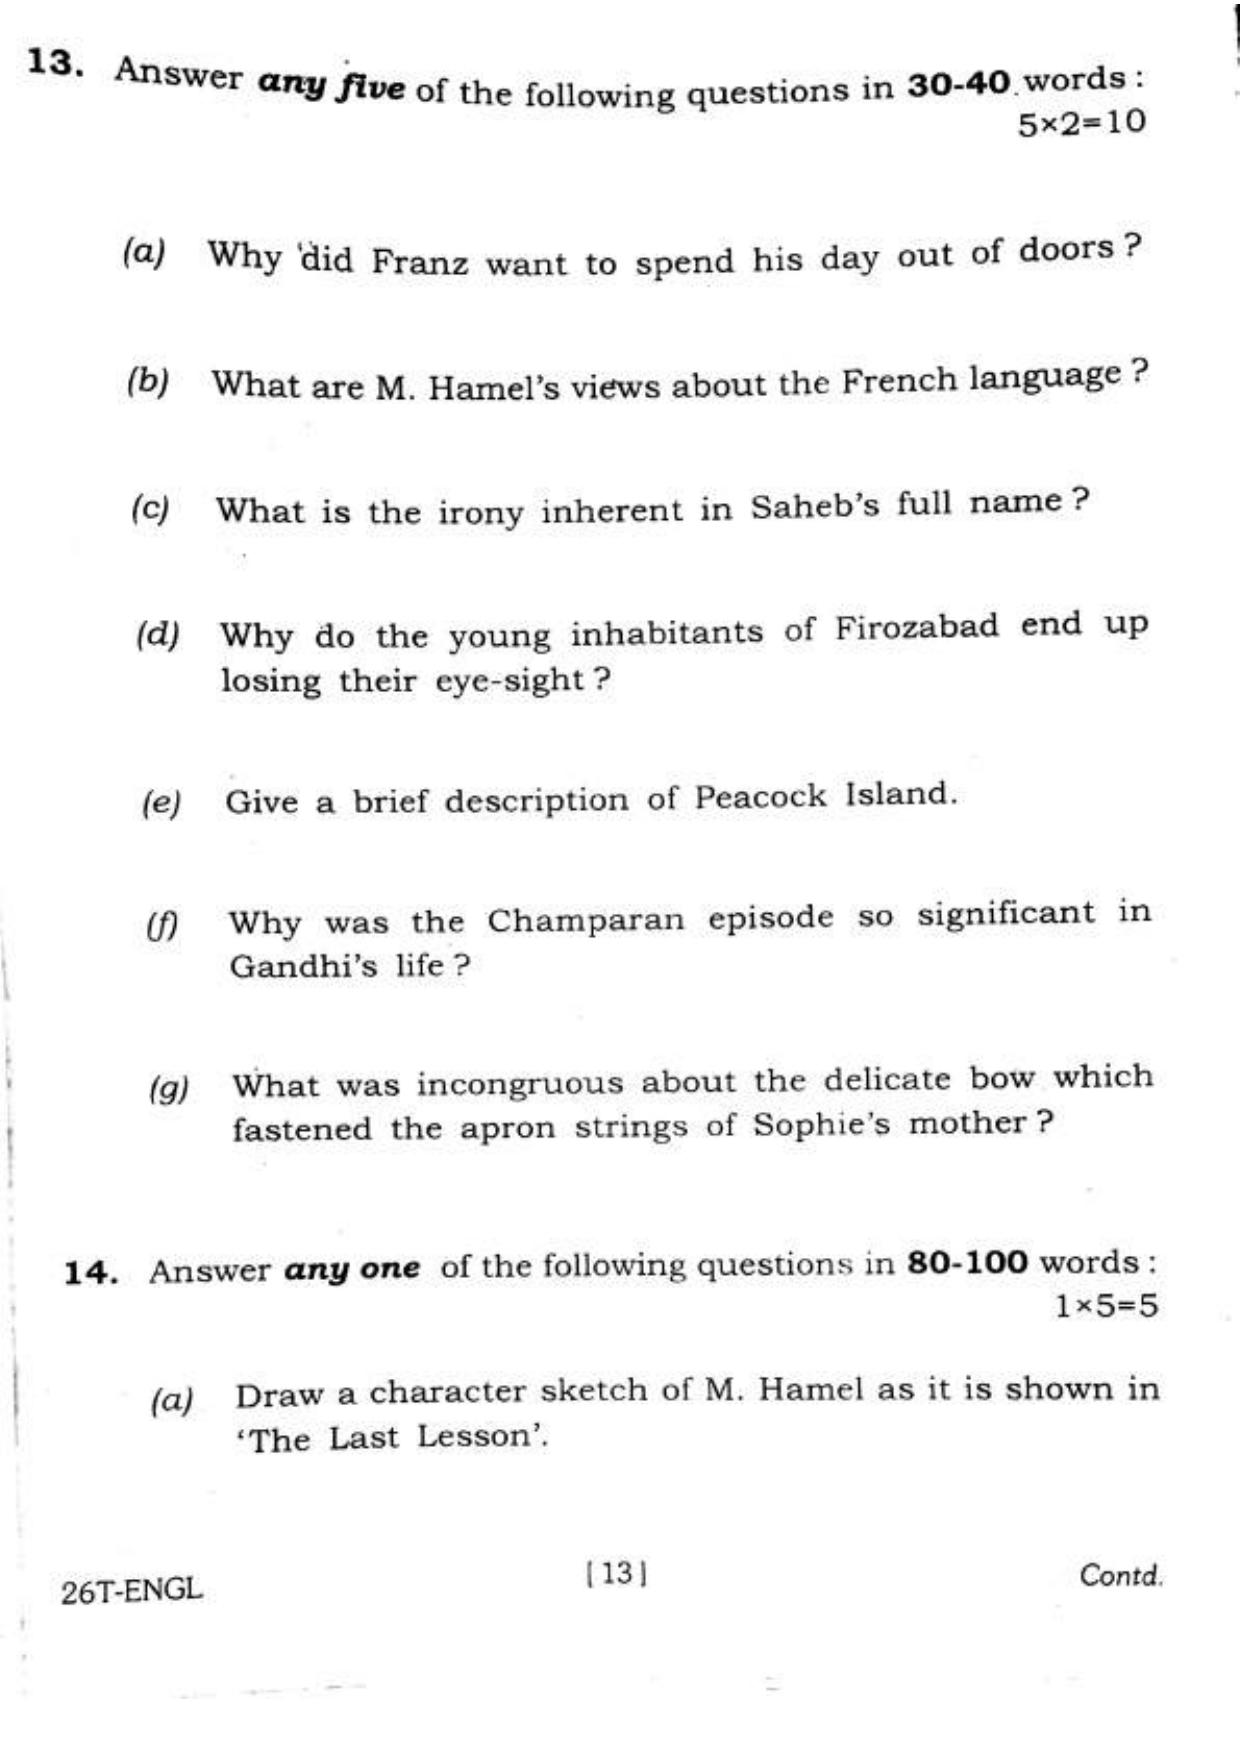 Assam HS 2nd Year English 2016 Question Paper - Page 13